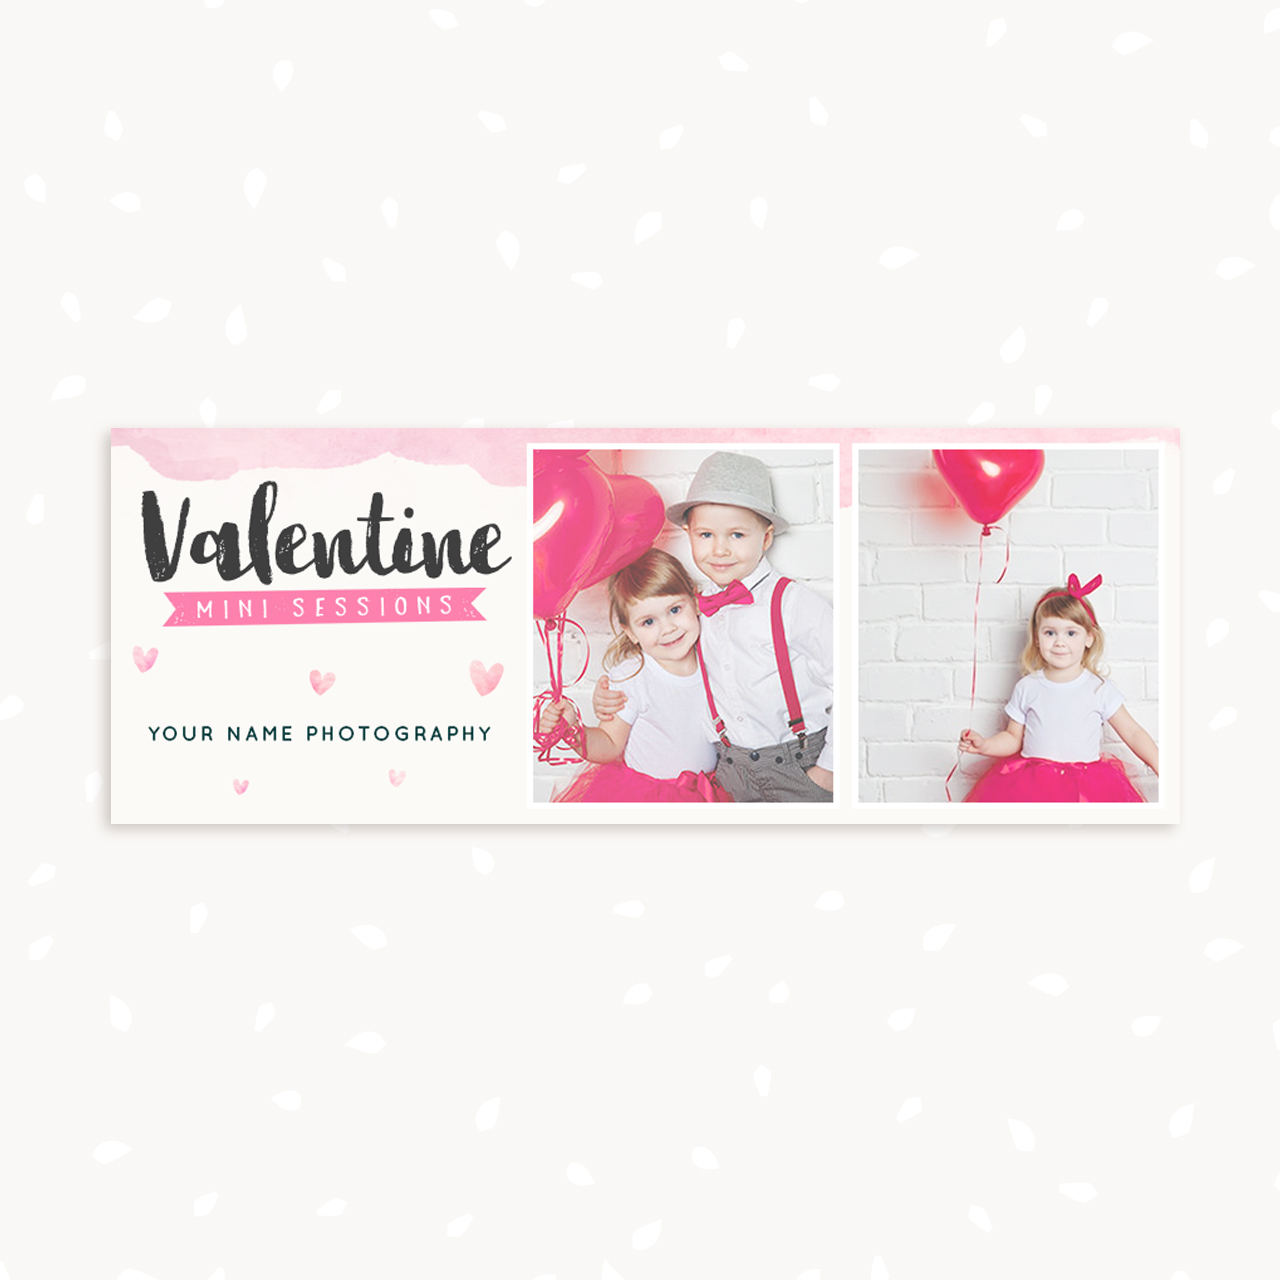 Valentines day Facebook covers